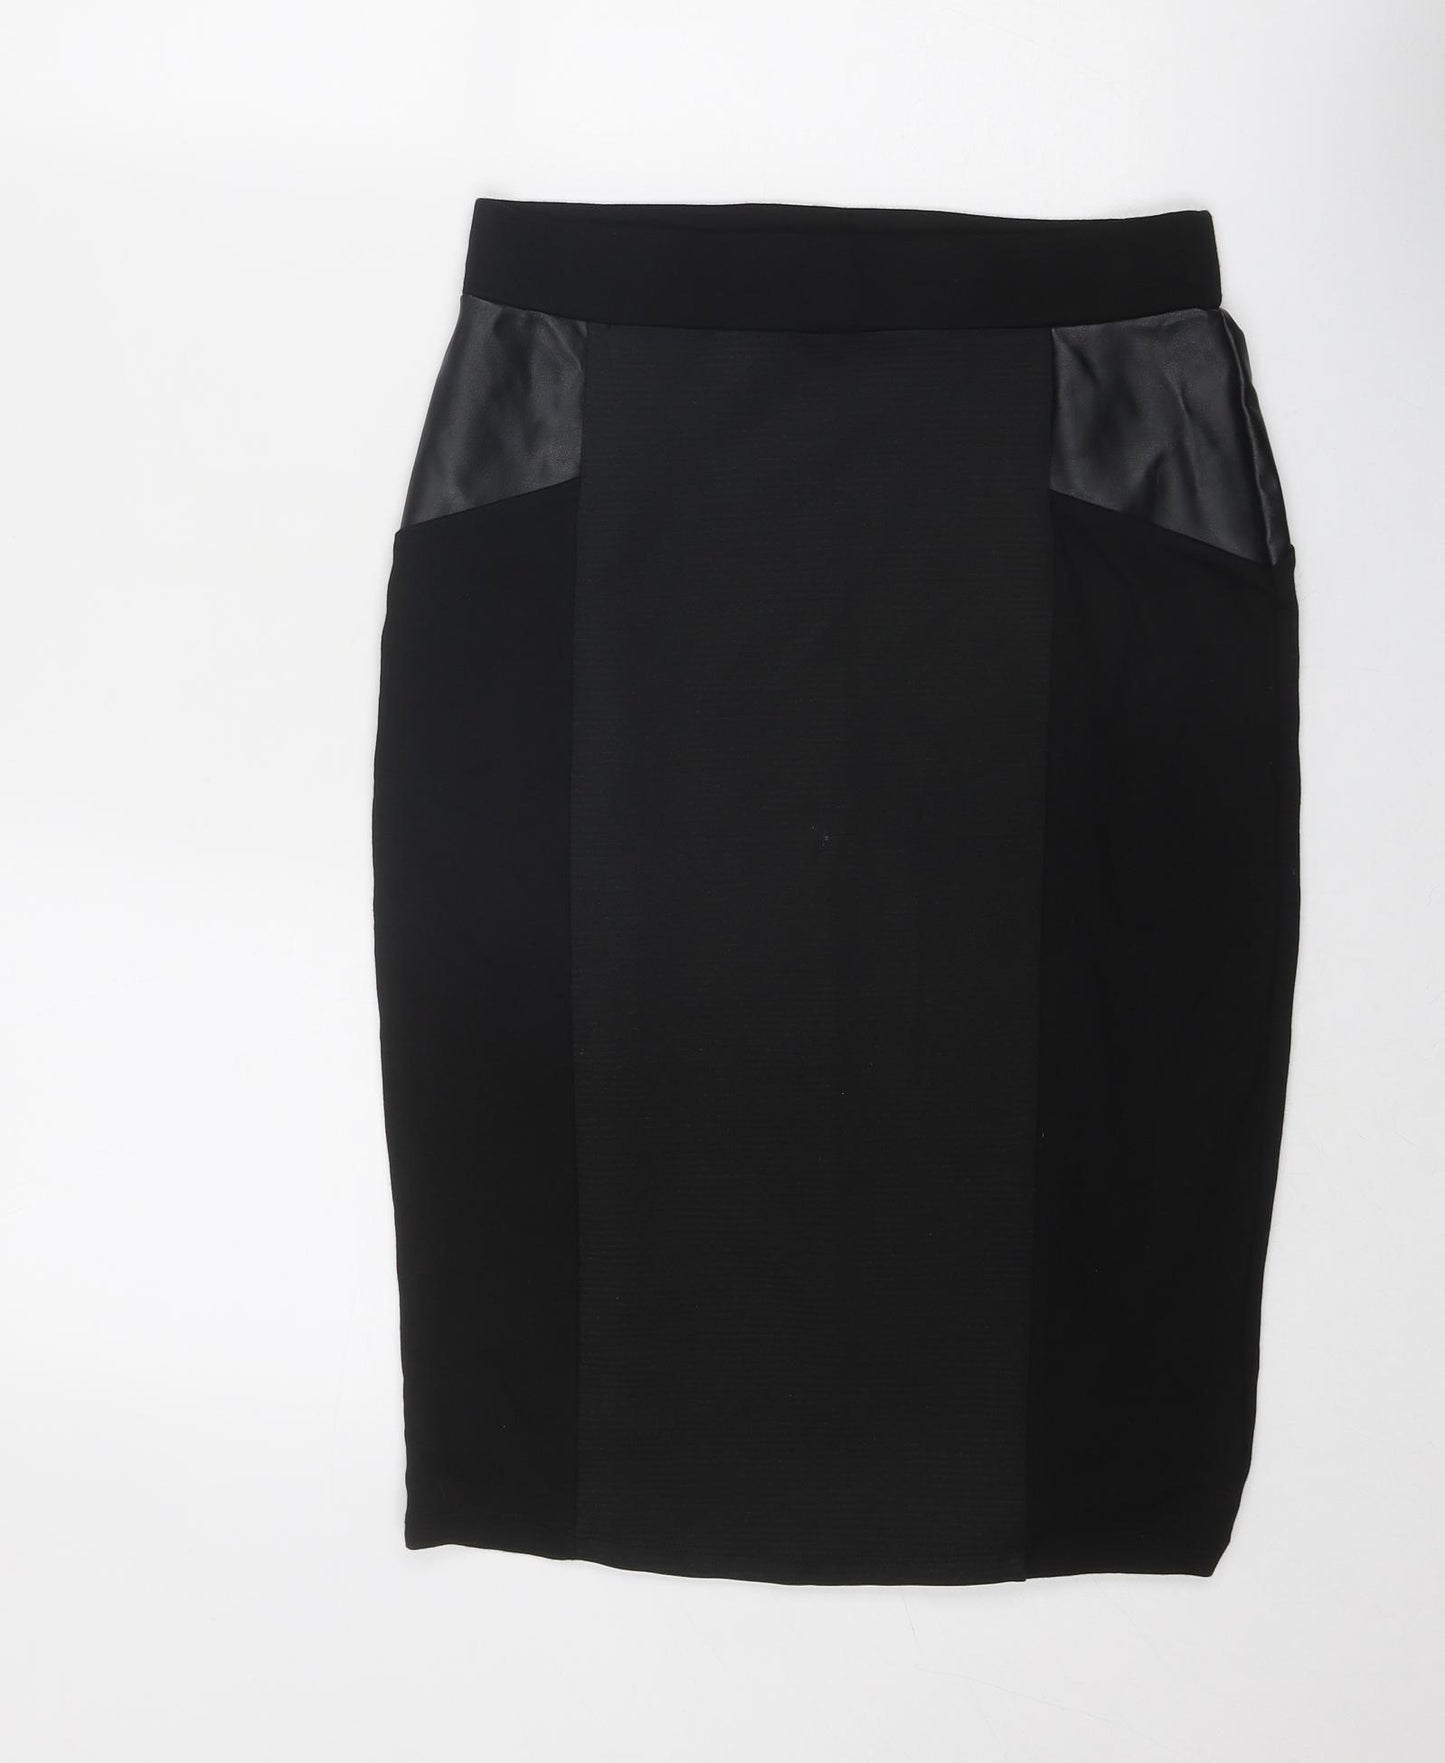 Dorothy Perkins Womens Black Polyester A-Line Skirt Size 10